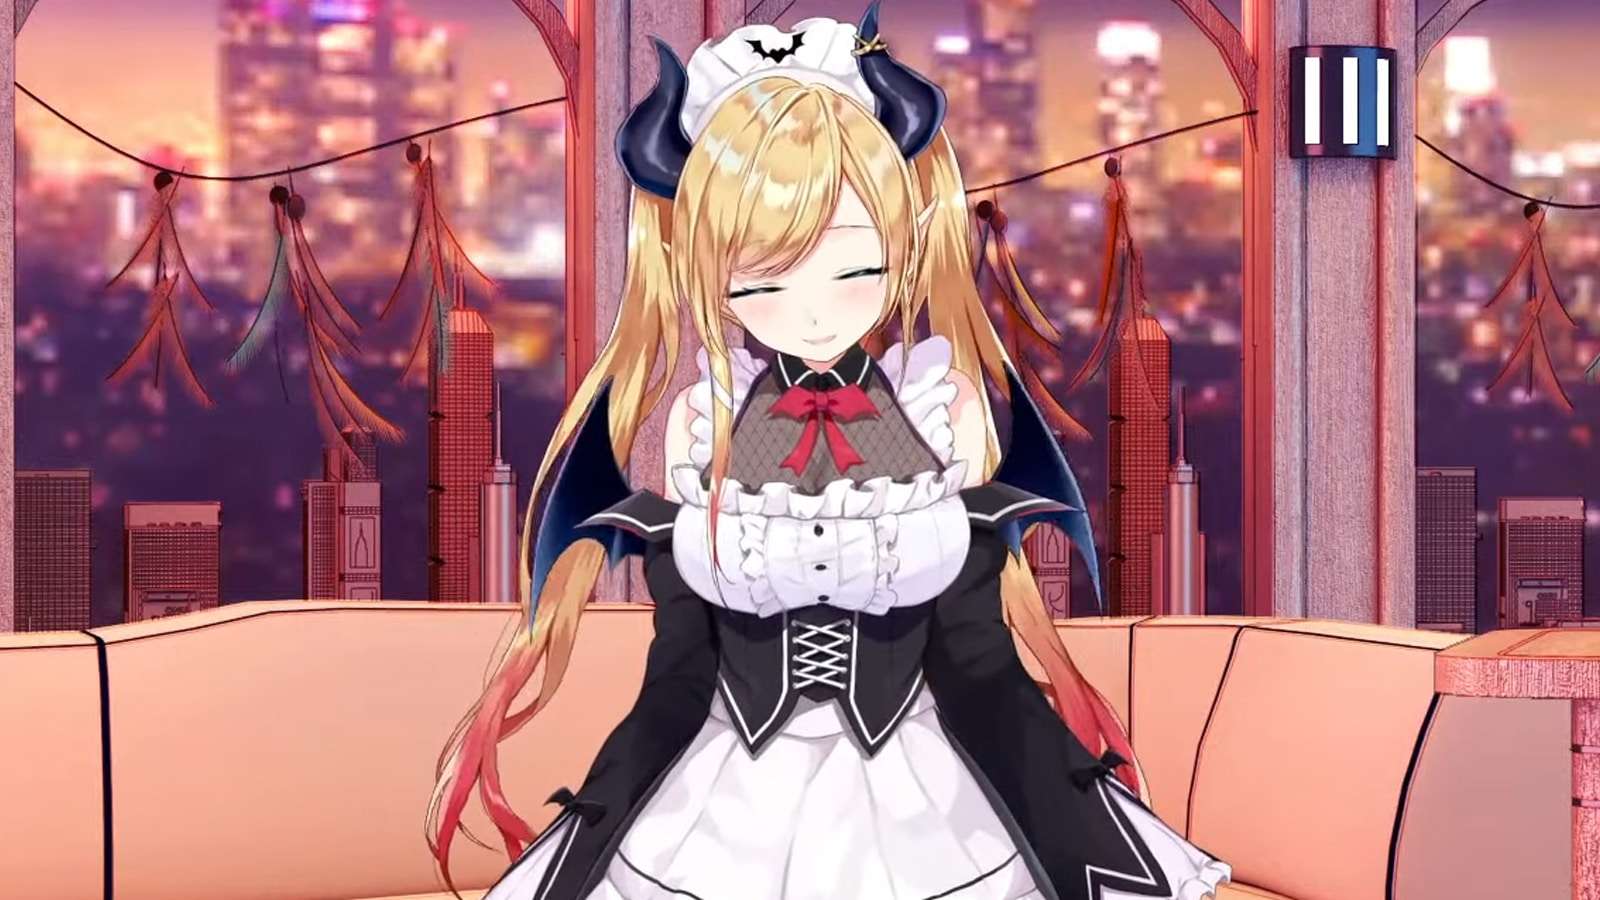 Yuzuki Choco Hololive VTuber wearing maid outfit